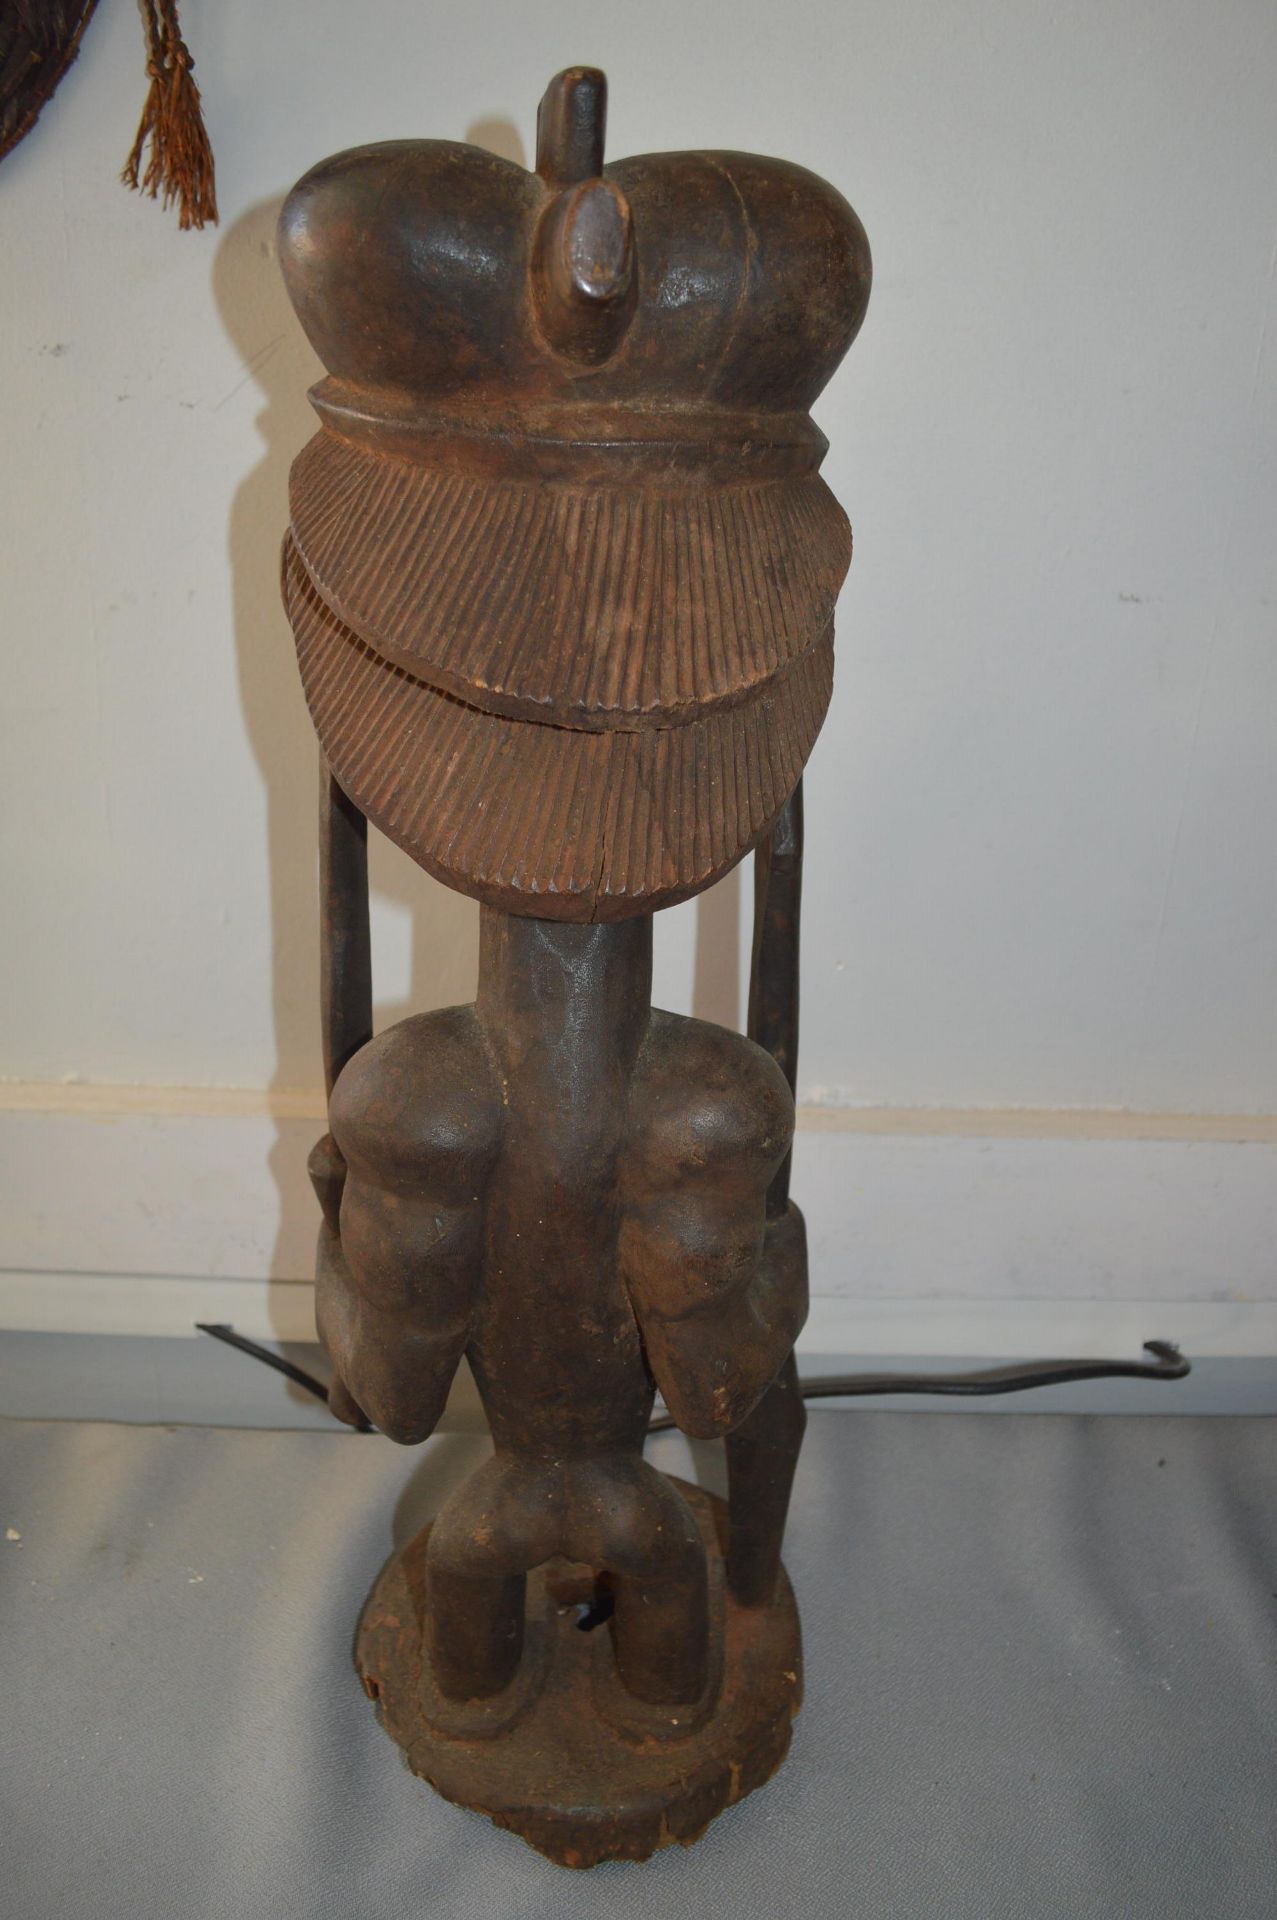 Luba Carved Wooden Male Tribal Fertility Figure - Image 3 of 4